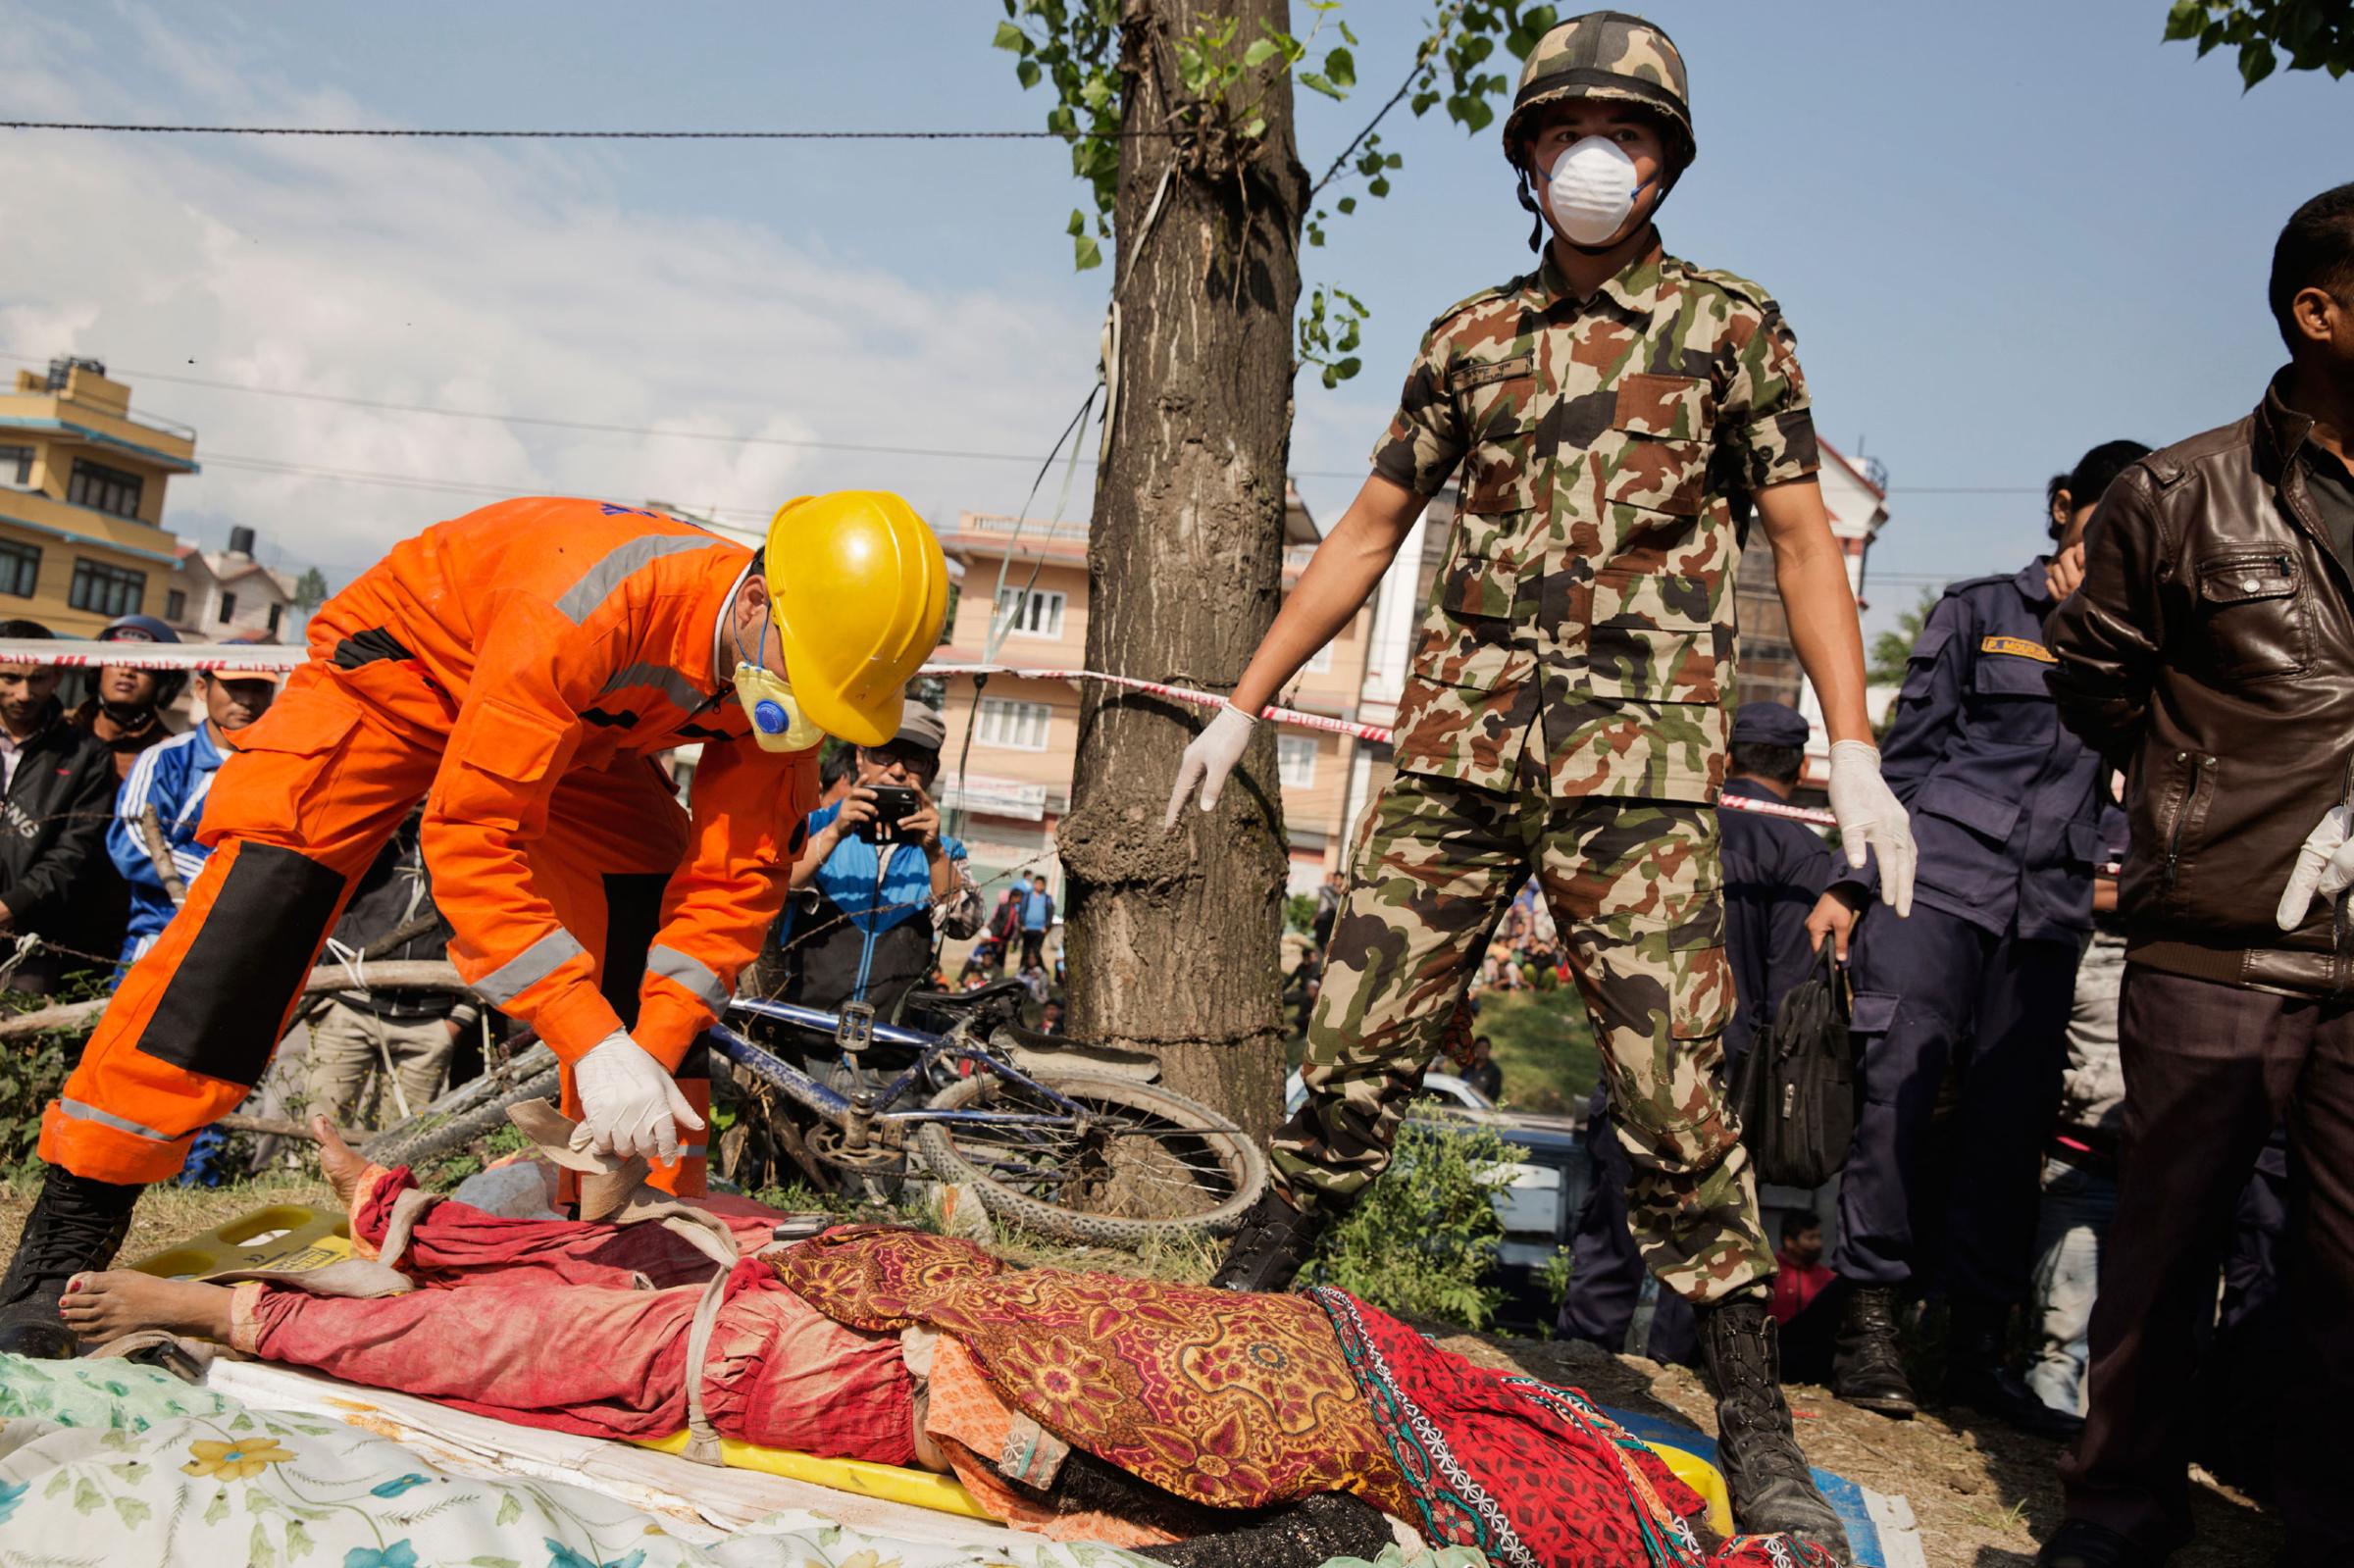 Indian and Nepali forces attempt to identify a body after it was recovered from a collapsed restaurant in Kathmandu, Nepal on April. 27, 2015. Nepal had a severe earthquake on April 25th. Photo by Adam Ferguson for Time